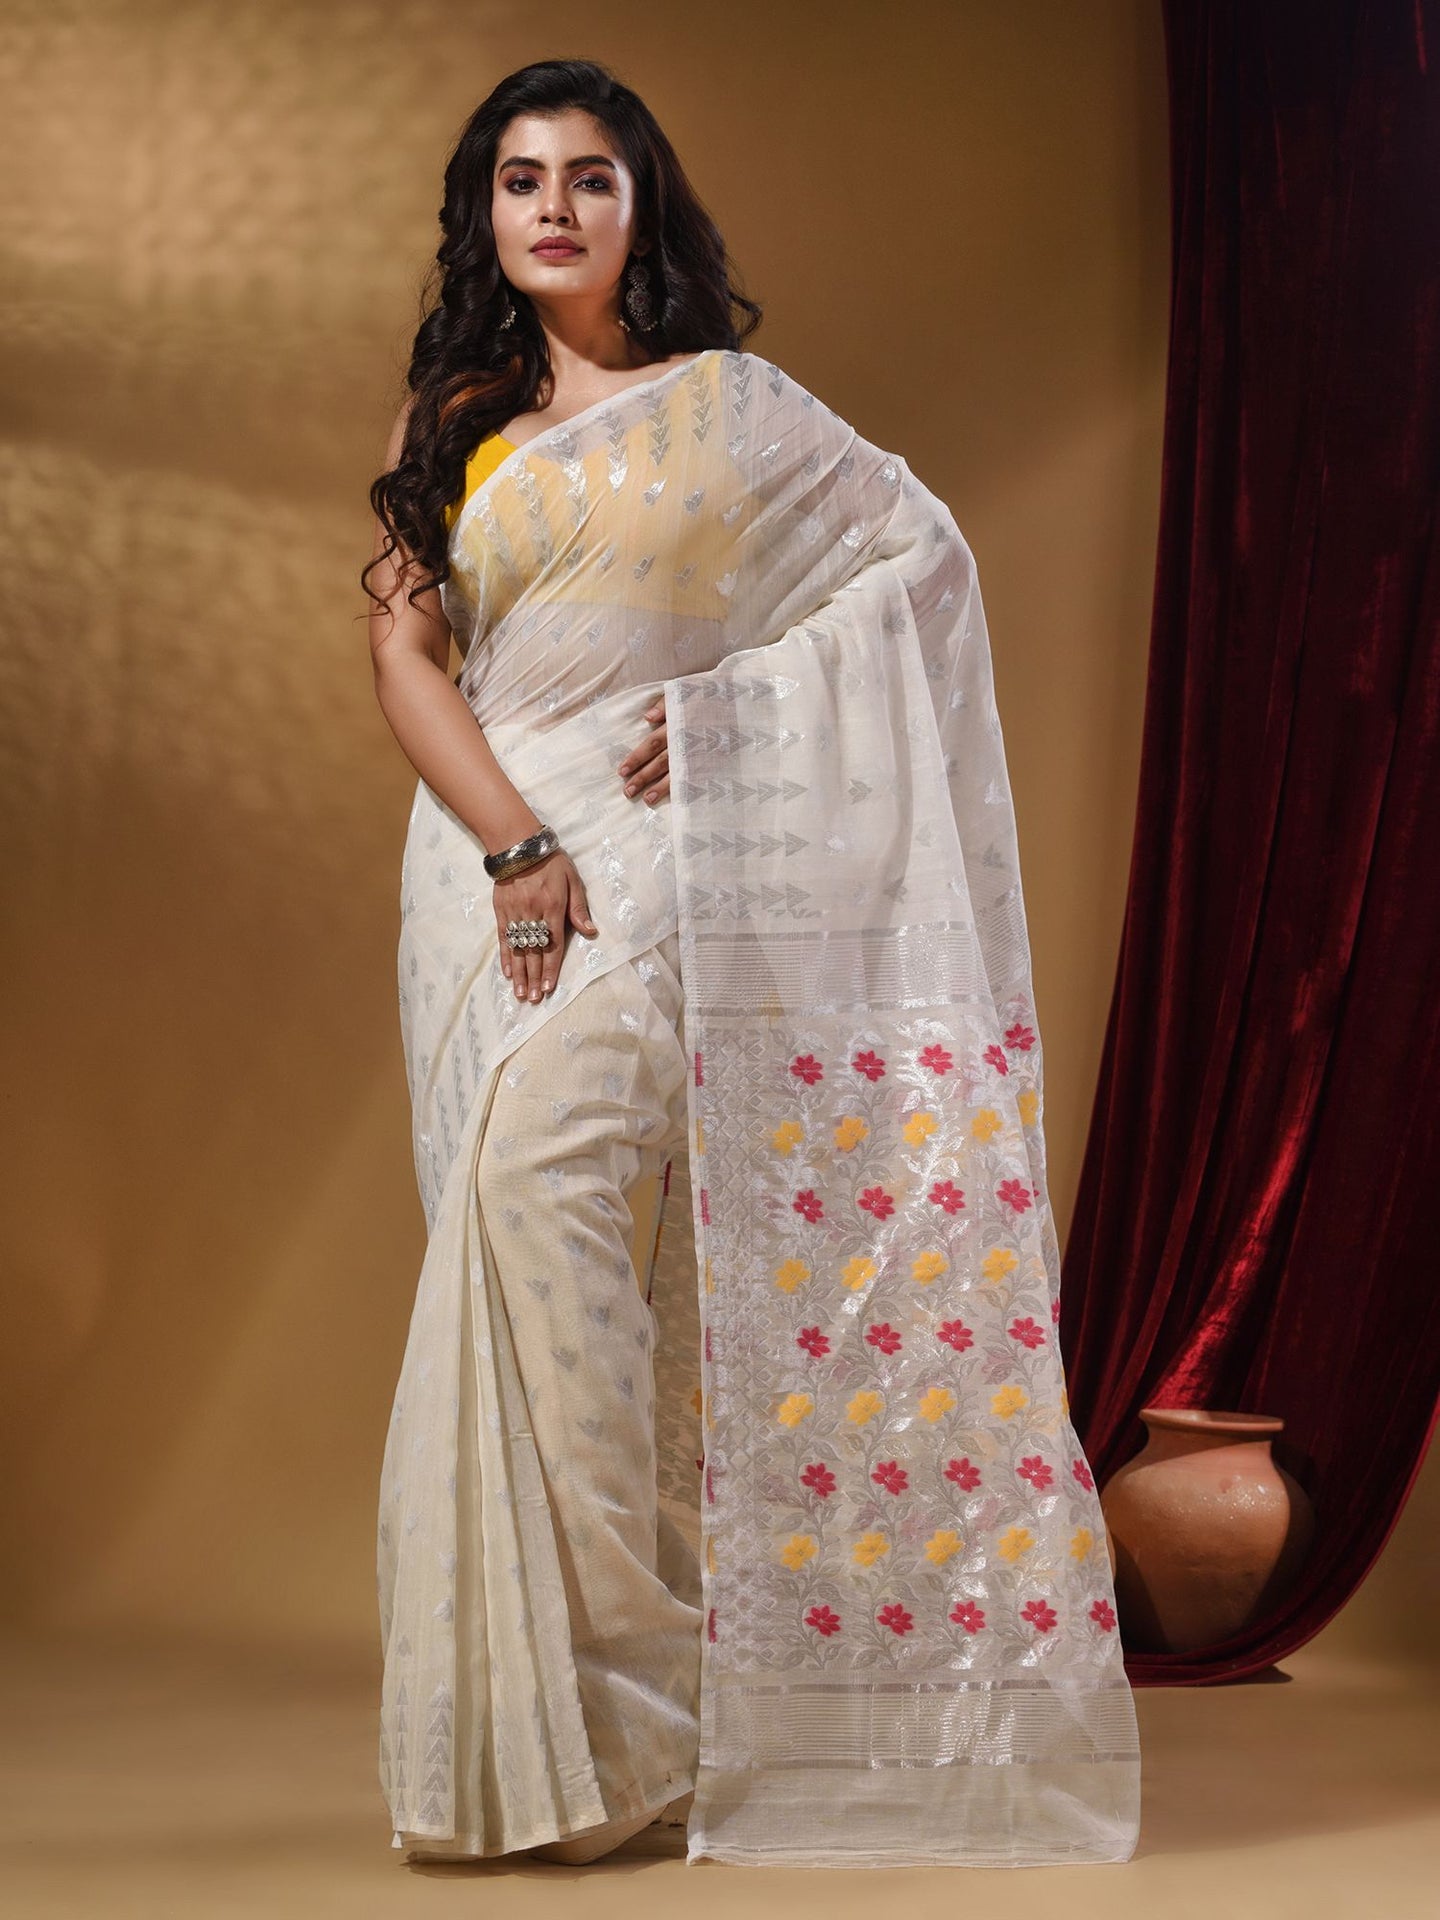 White Cotton Handwoven Jamdani Saree With Geometric Designs and Floral Patterns